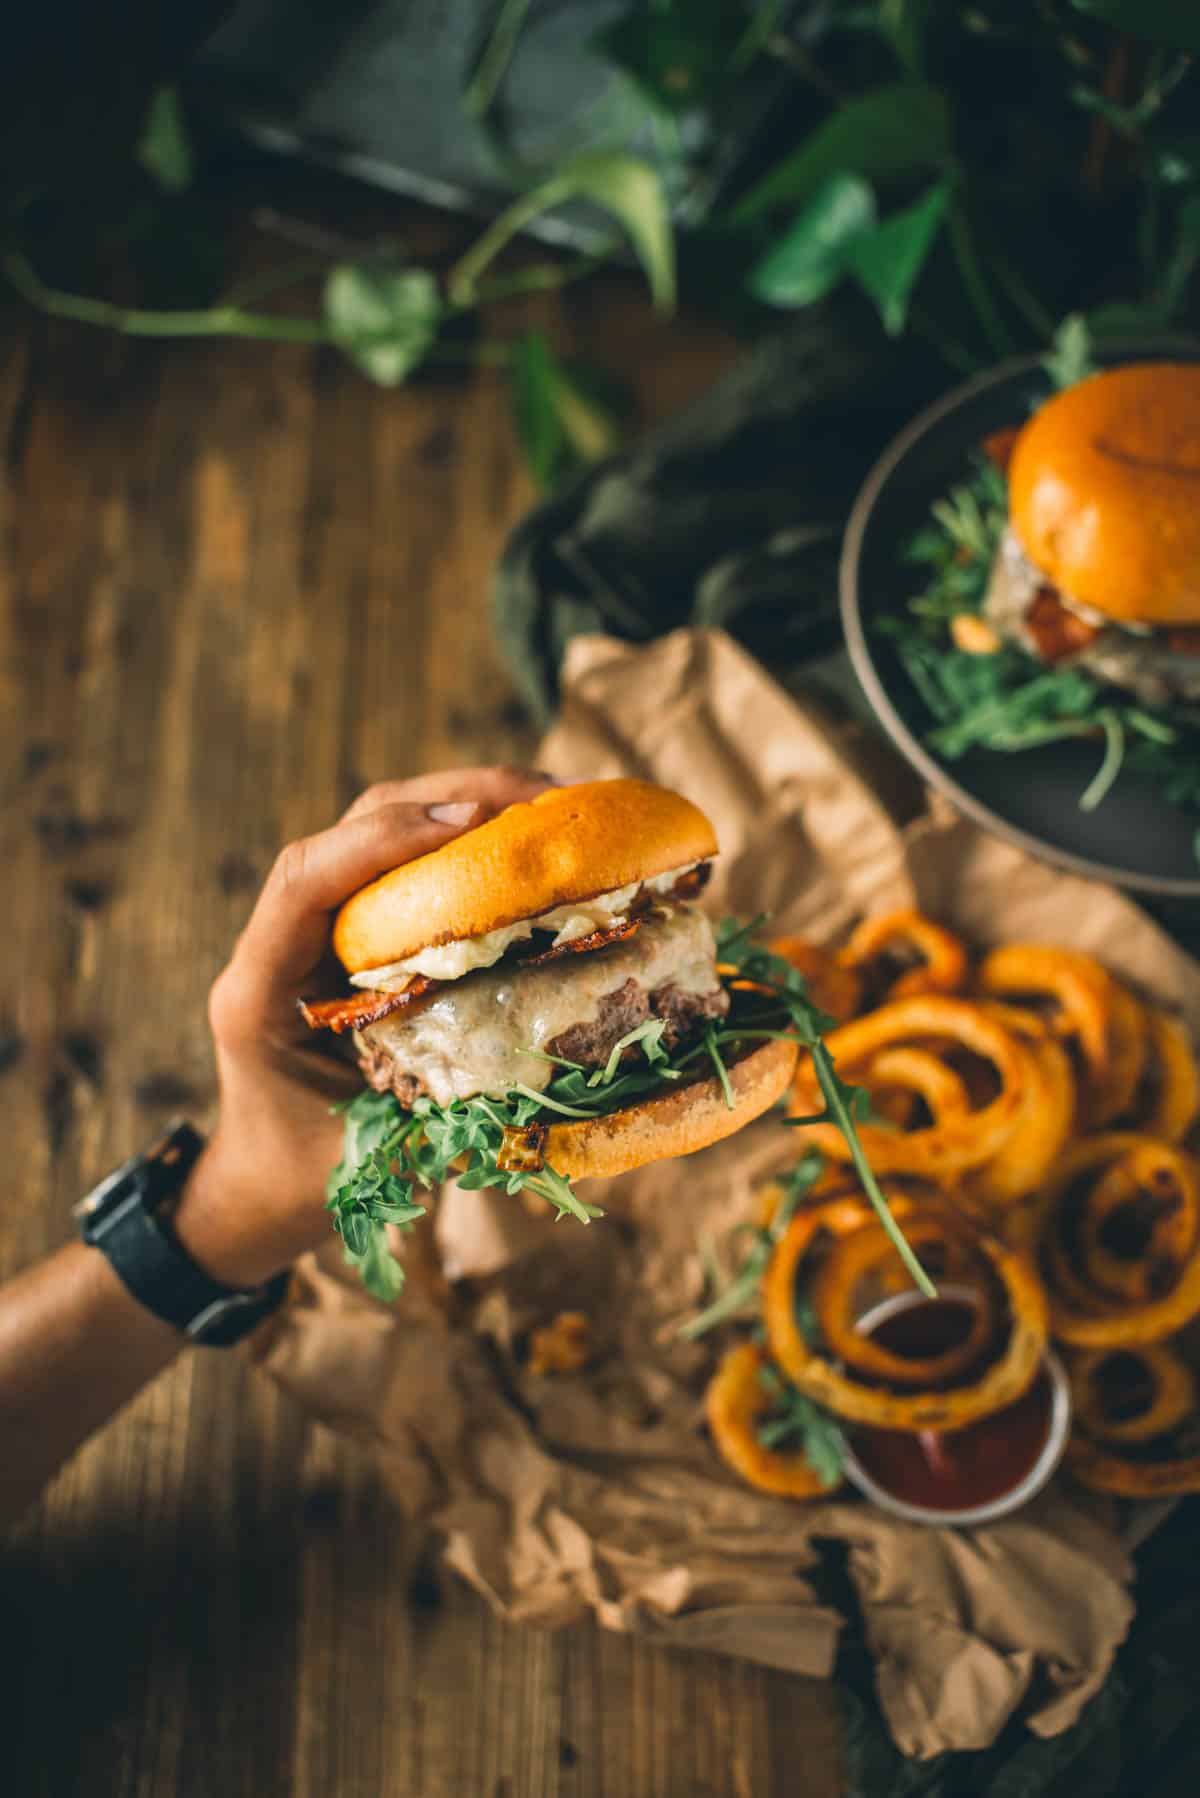 A hand holding a loaded bacon burger near a plate of crispy onion rings with a small container of dipping sauce, on a wooden surface with some greenery in the background.